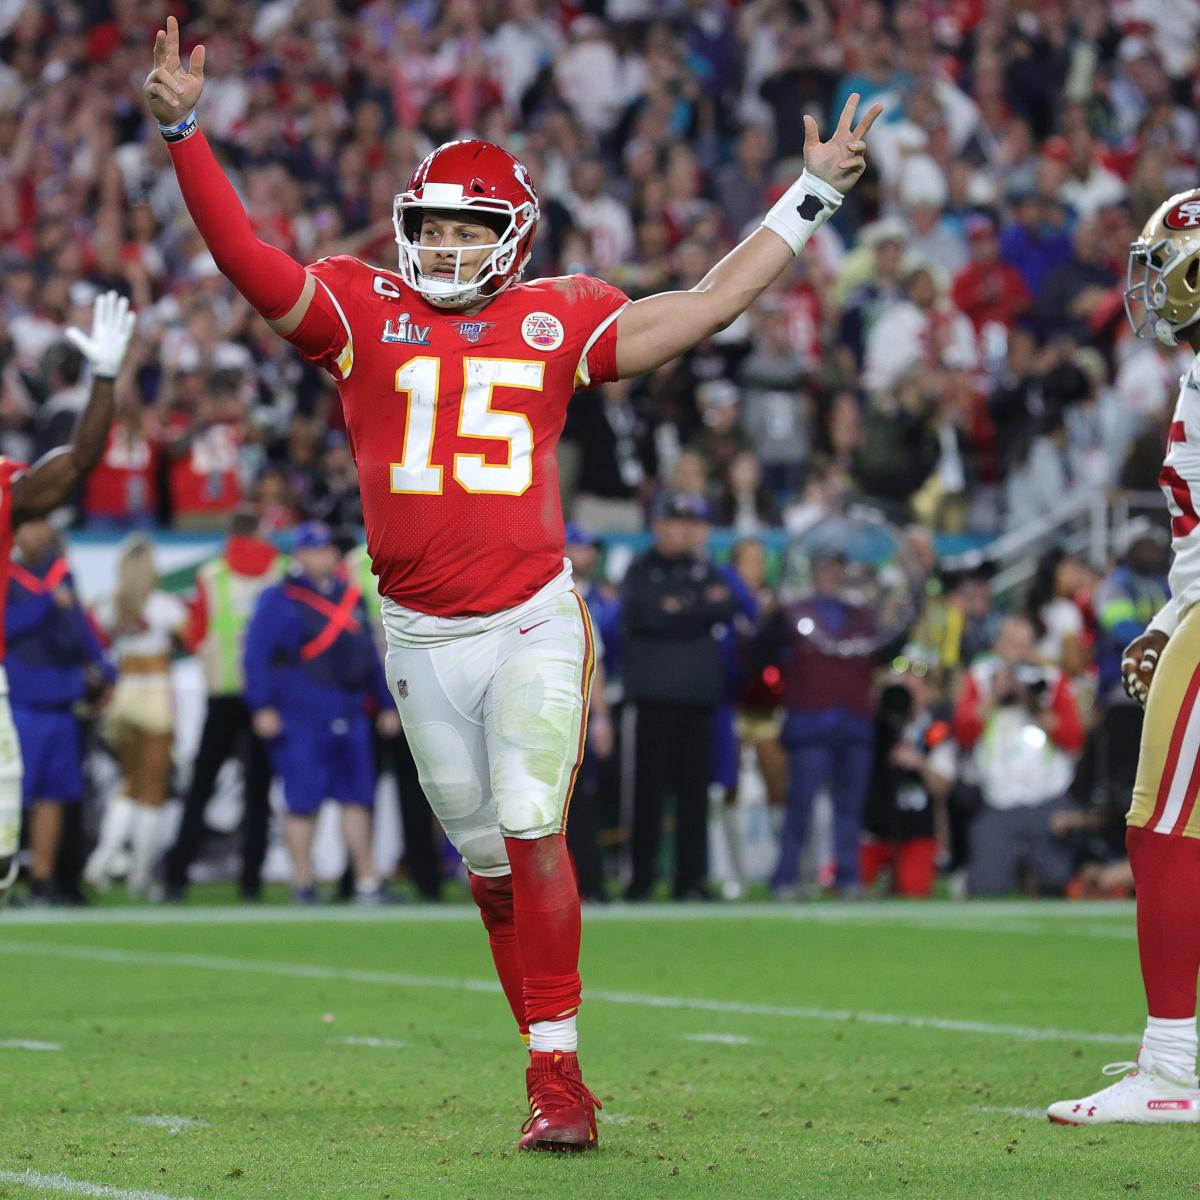 The Kansas City Chiefs are headed to their 3rd Super Bowl in 4 years